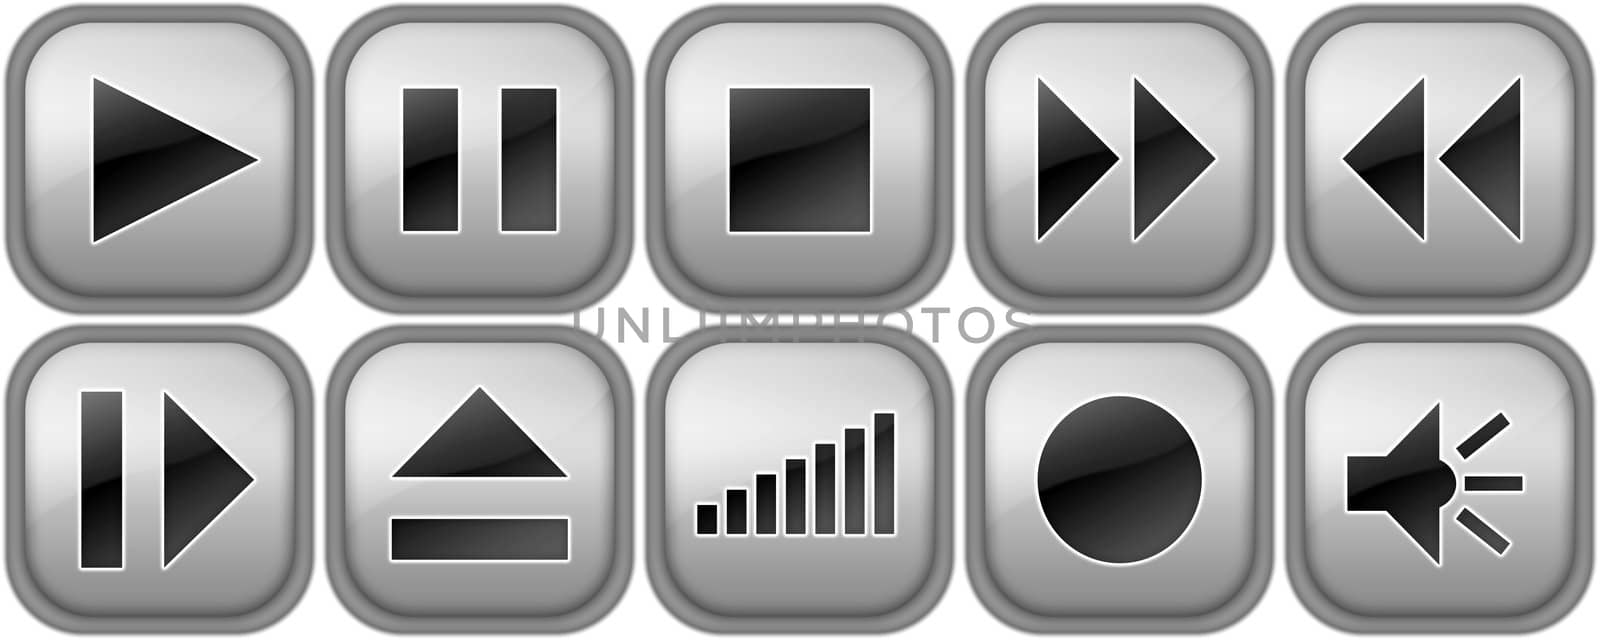 Set of silver buttons for music player